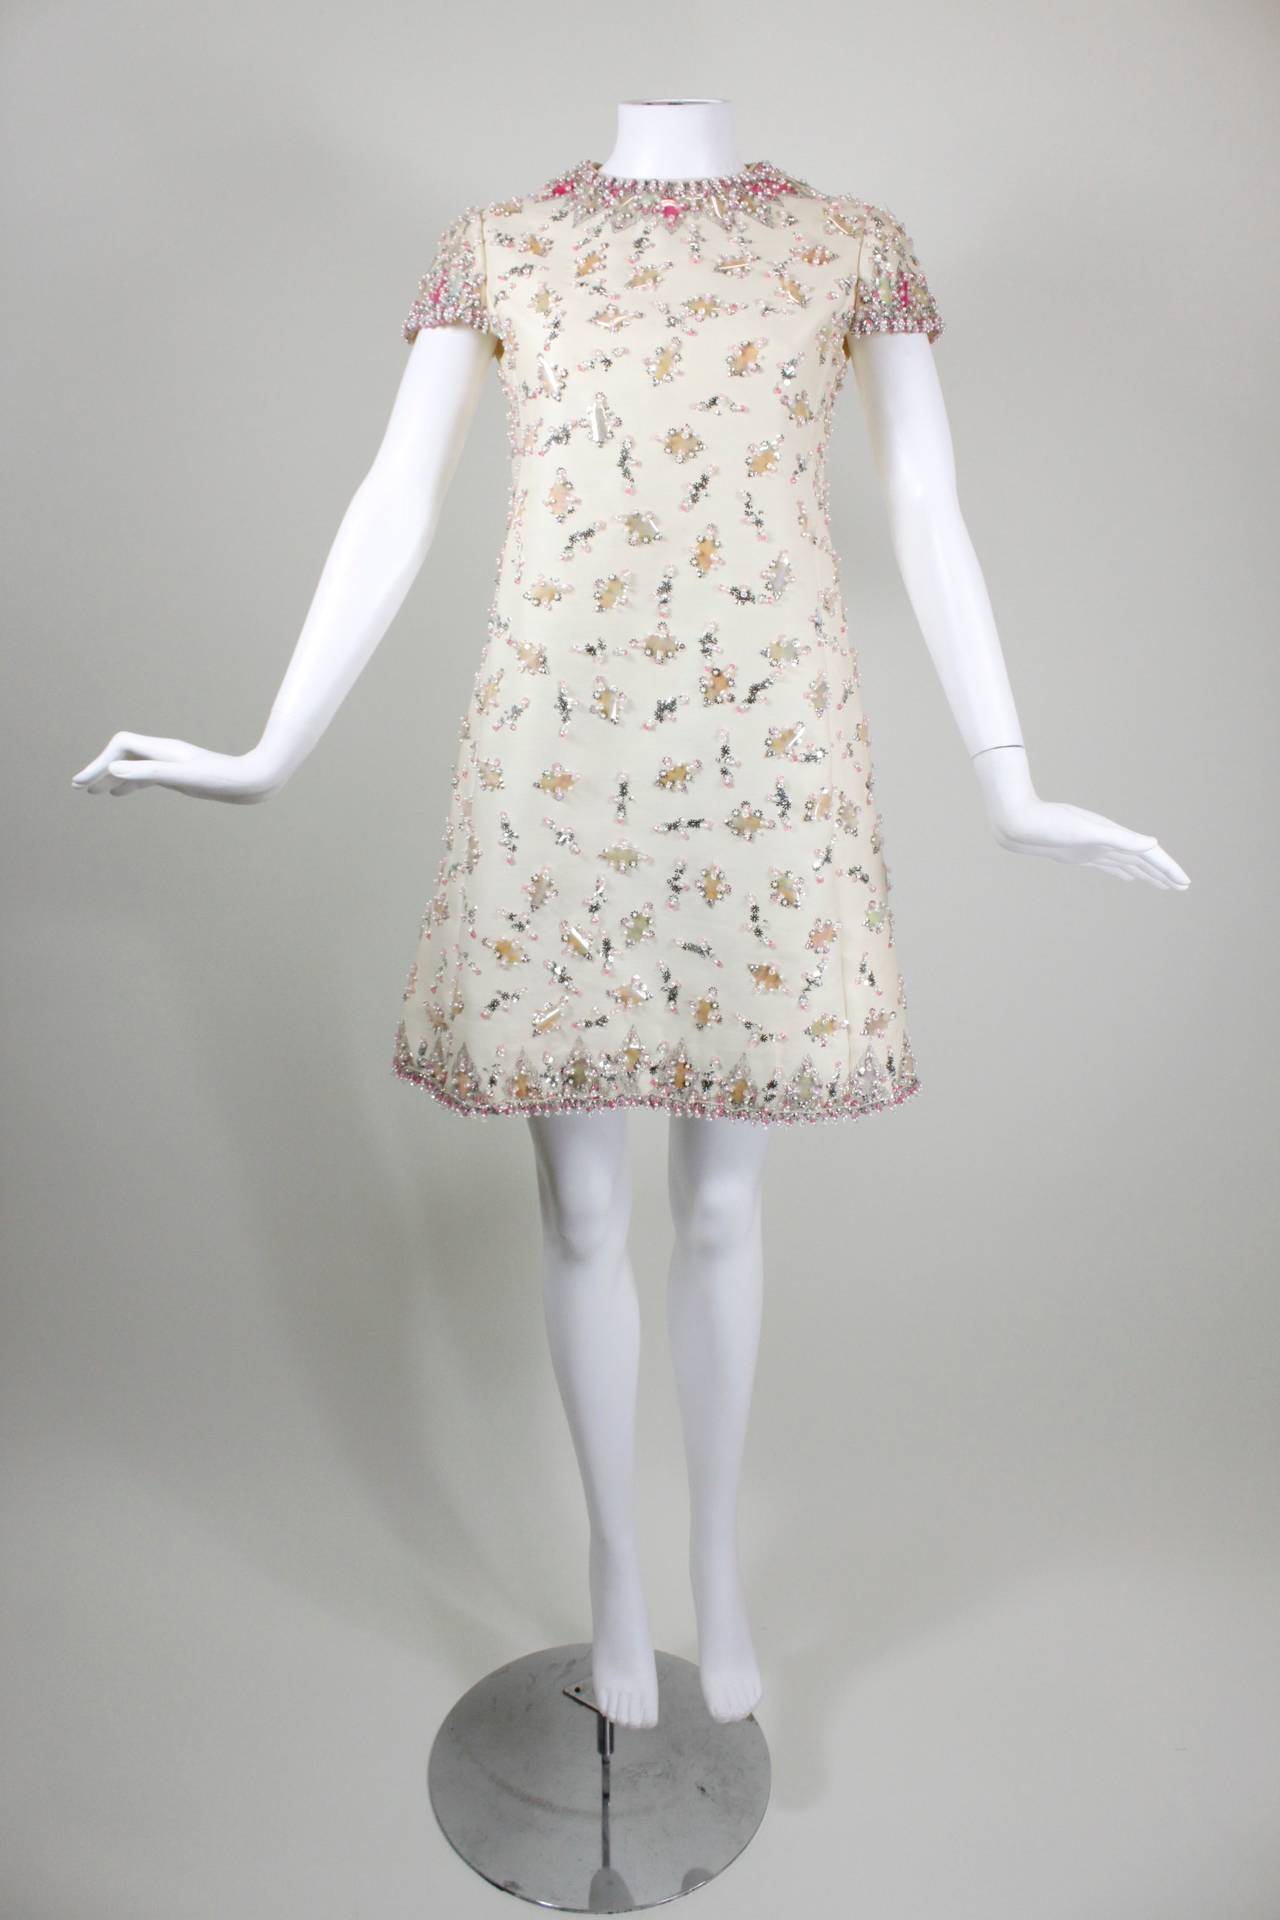 1960s Malcolm Starr Cream Party Dress with Blush Paillettes

-Silver metallic geometric embroidery at neckline and hem
-Clear iridescent and vibrant pink paillettes throughout
-Light pink, bright pink, and pearl beading at the neckline
-Silver